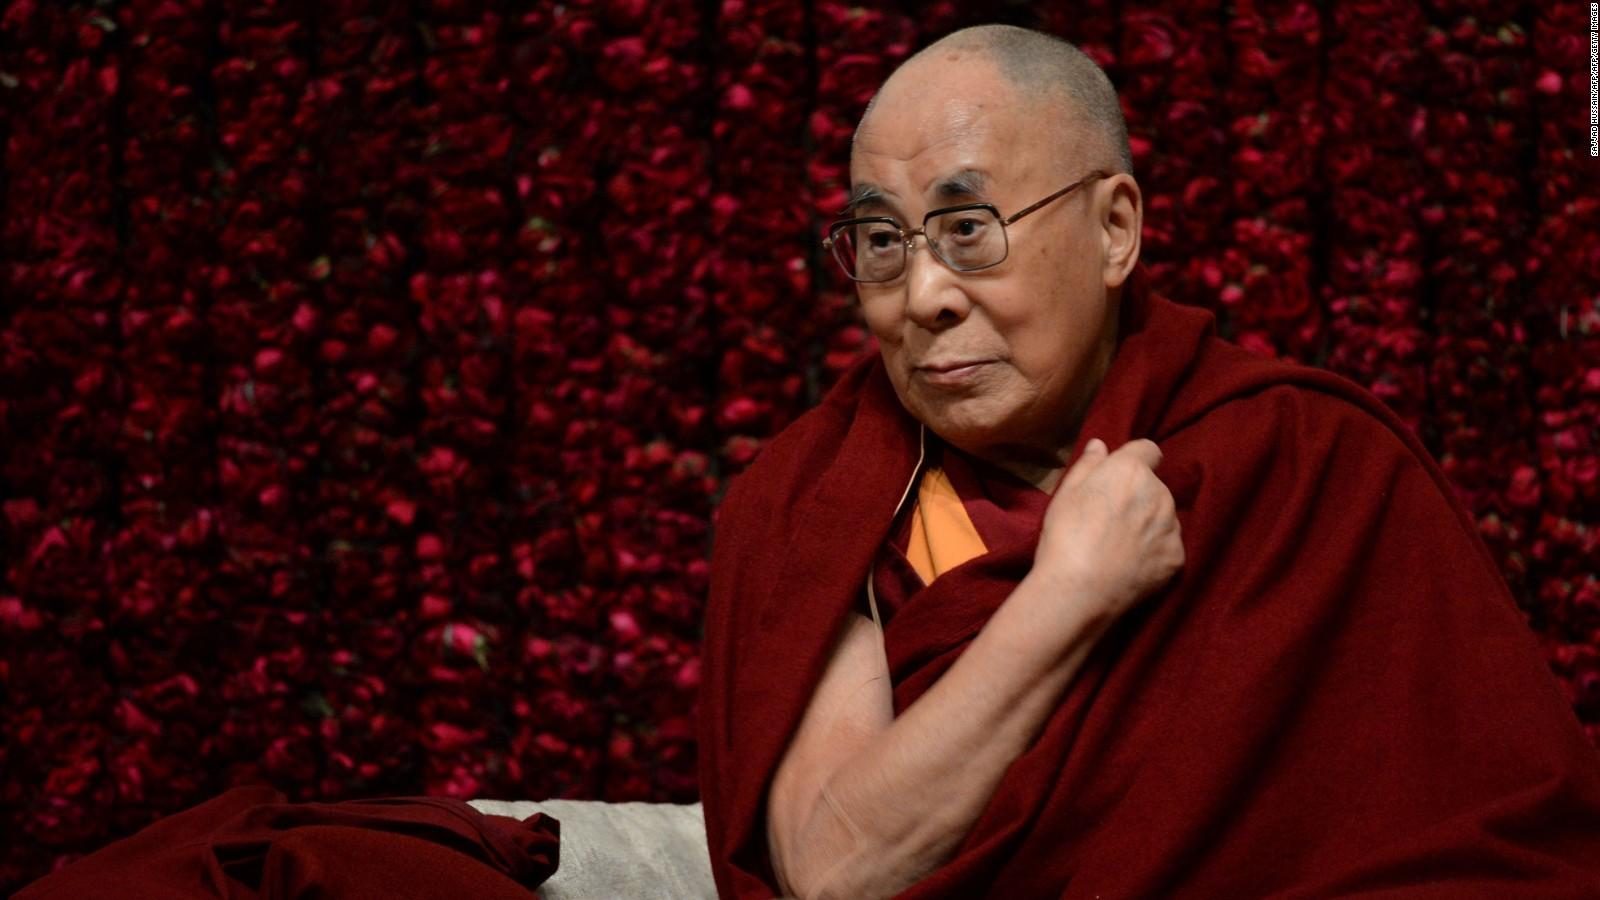 Playful humor: The Dalai Lama's secret weapon and how it can be